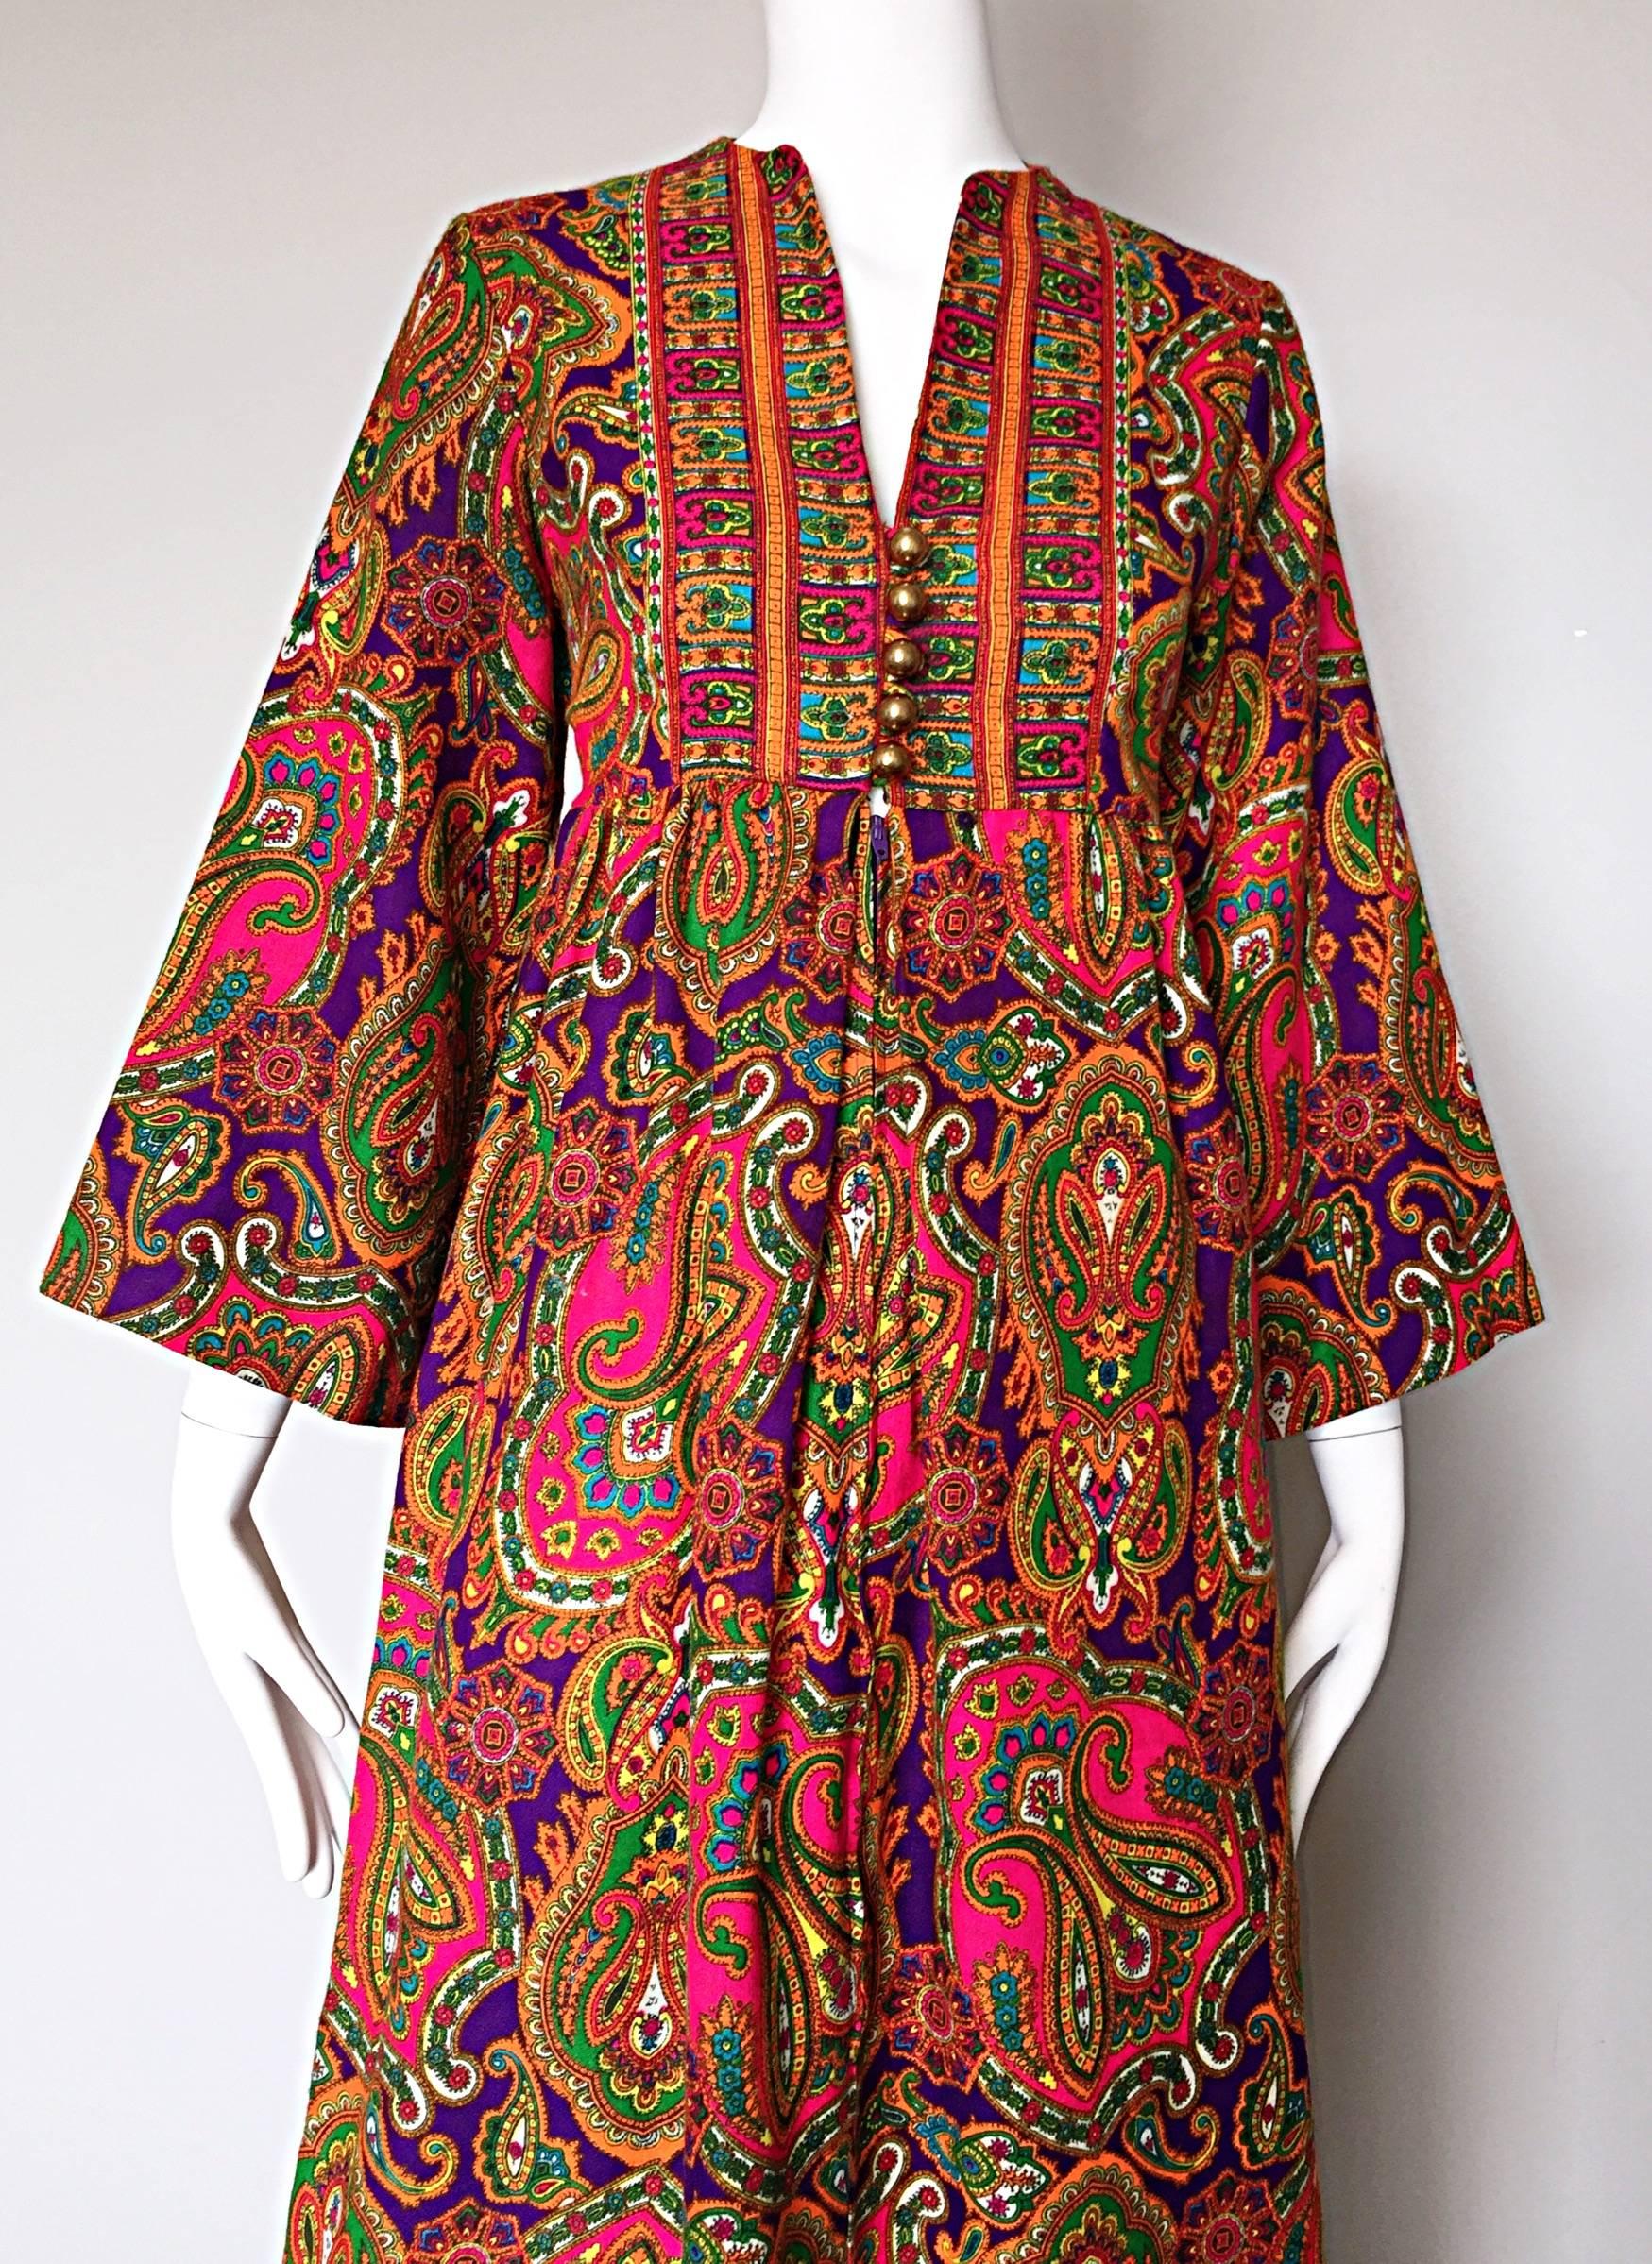 Brown Vintage Joseph Magnin 1970s Psychedelic Paisley 70s Colorful Caftan Maxi Dress